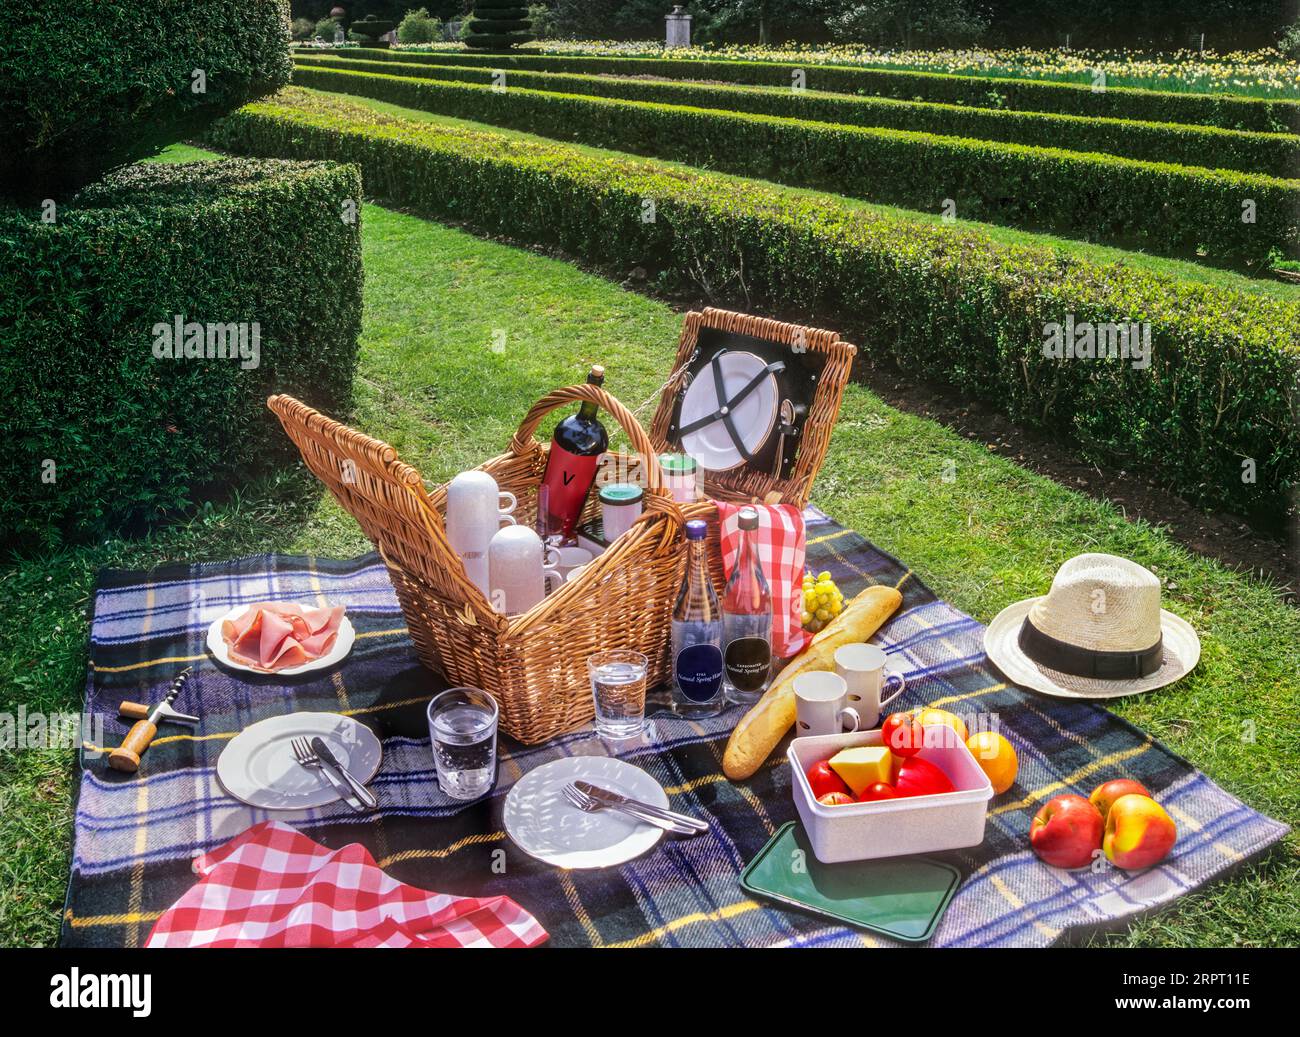 Picnic basket hamper and formal alfresco UK garden, food & wine selection laid out in a summer British English stately home country estate, England UK Stock Photo